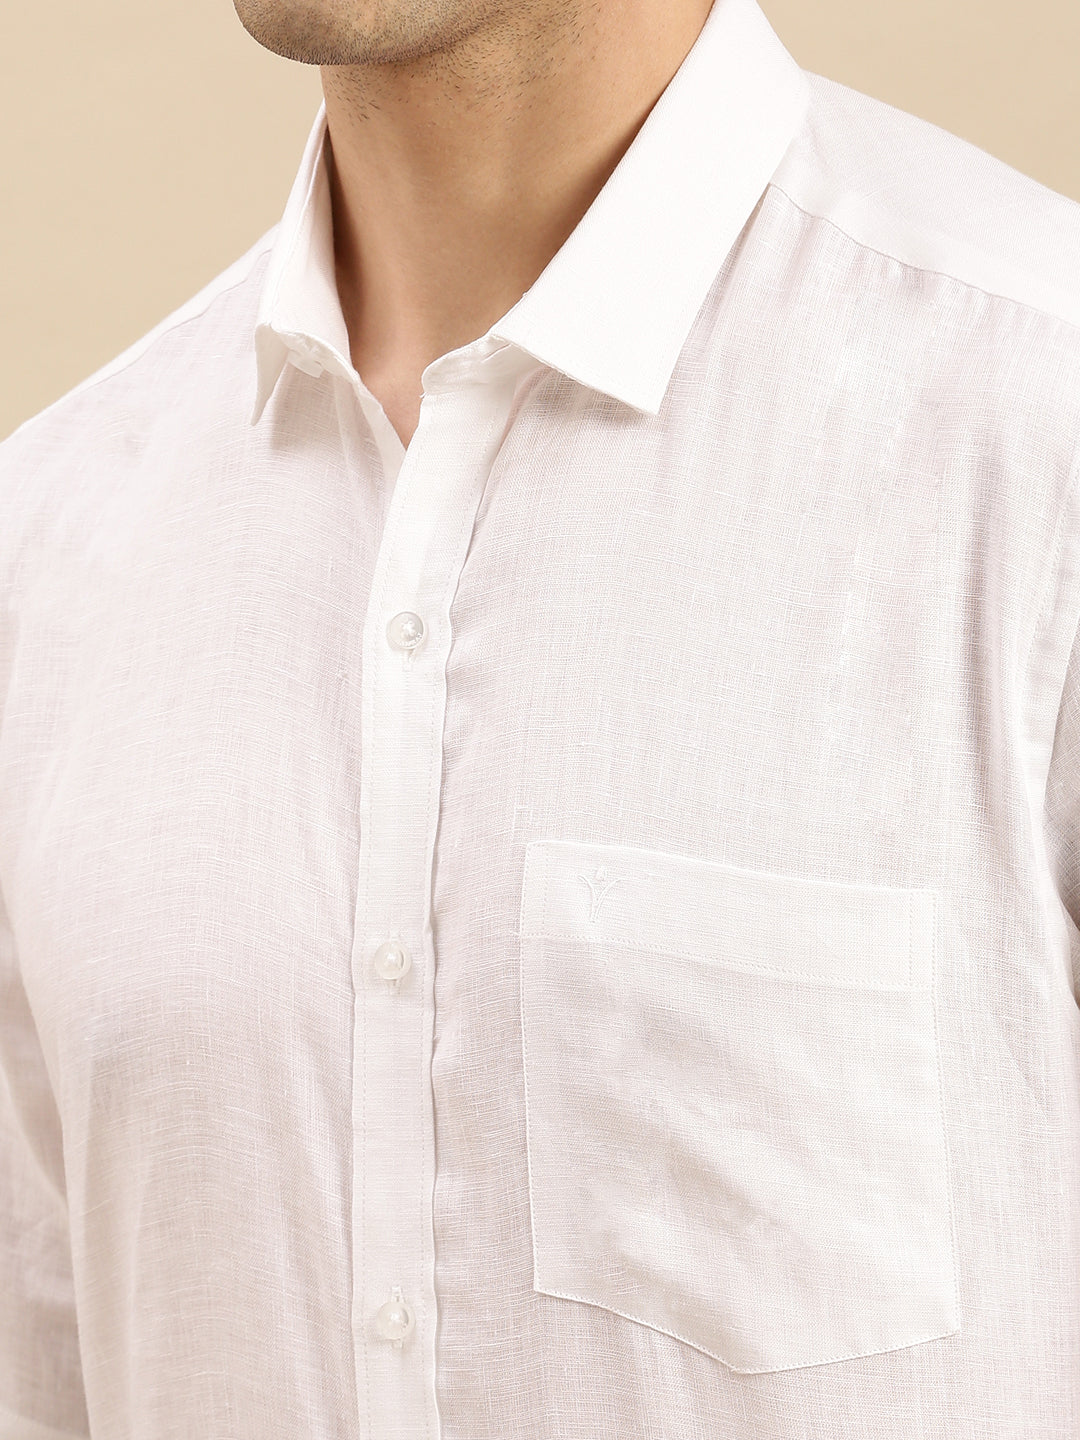 Mens Smart Fit 100% Cotton White Shirt Half Sleeves White Trend -Zoom view